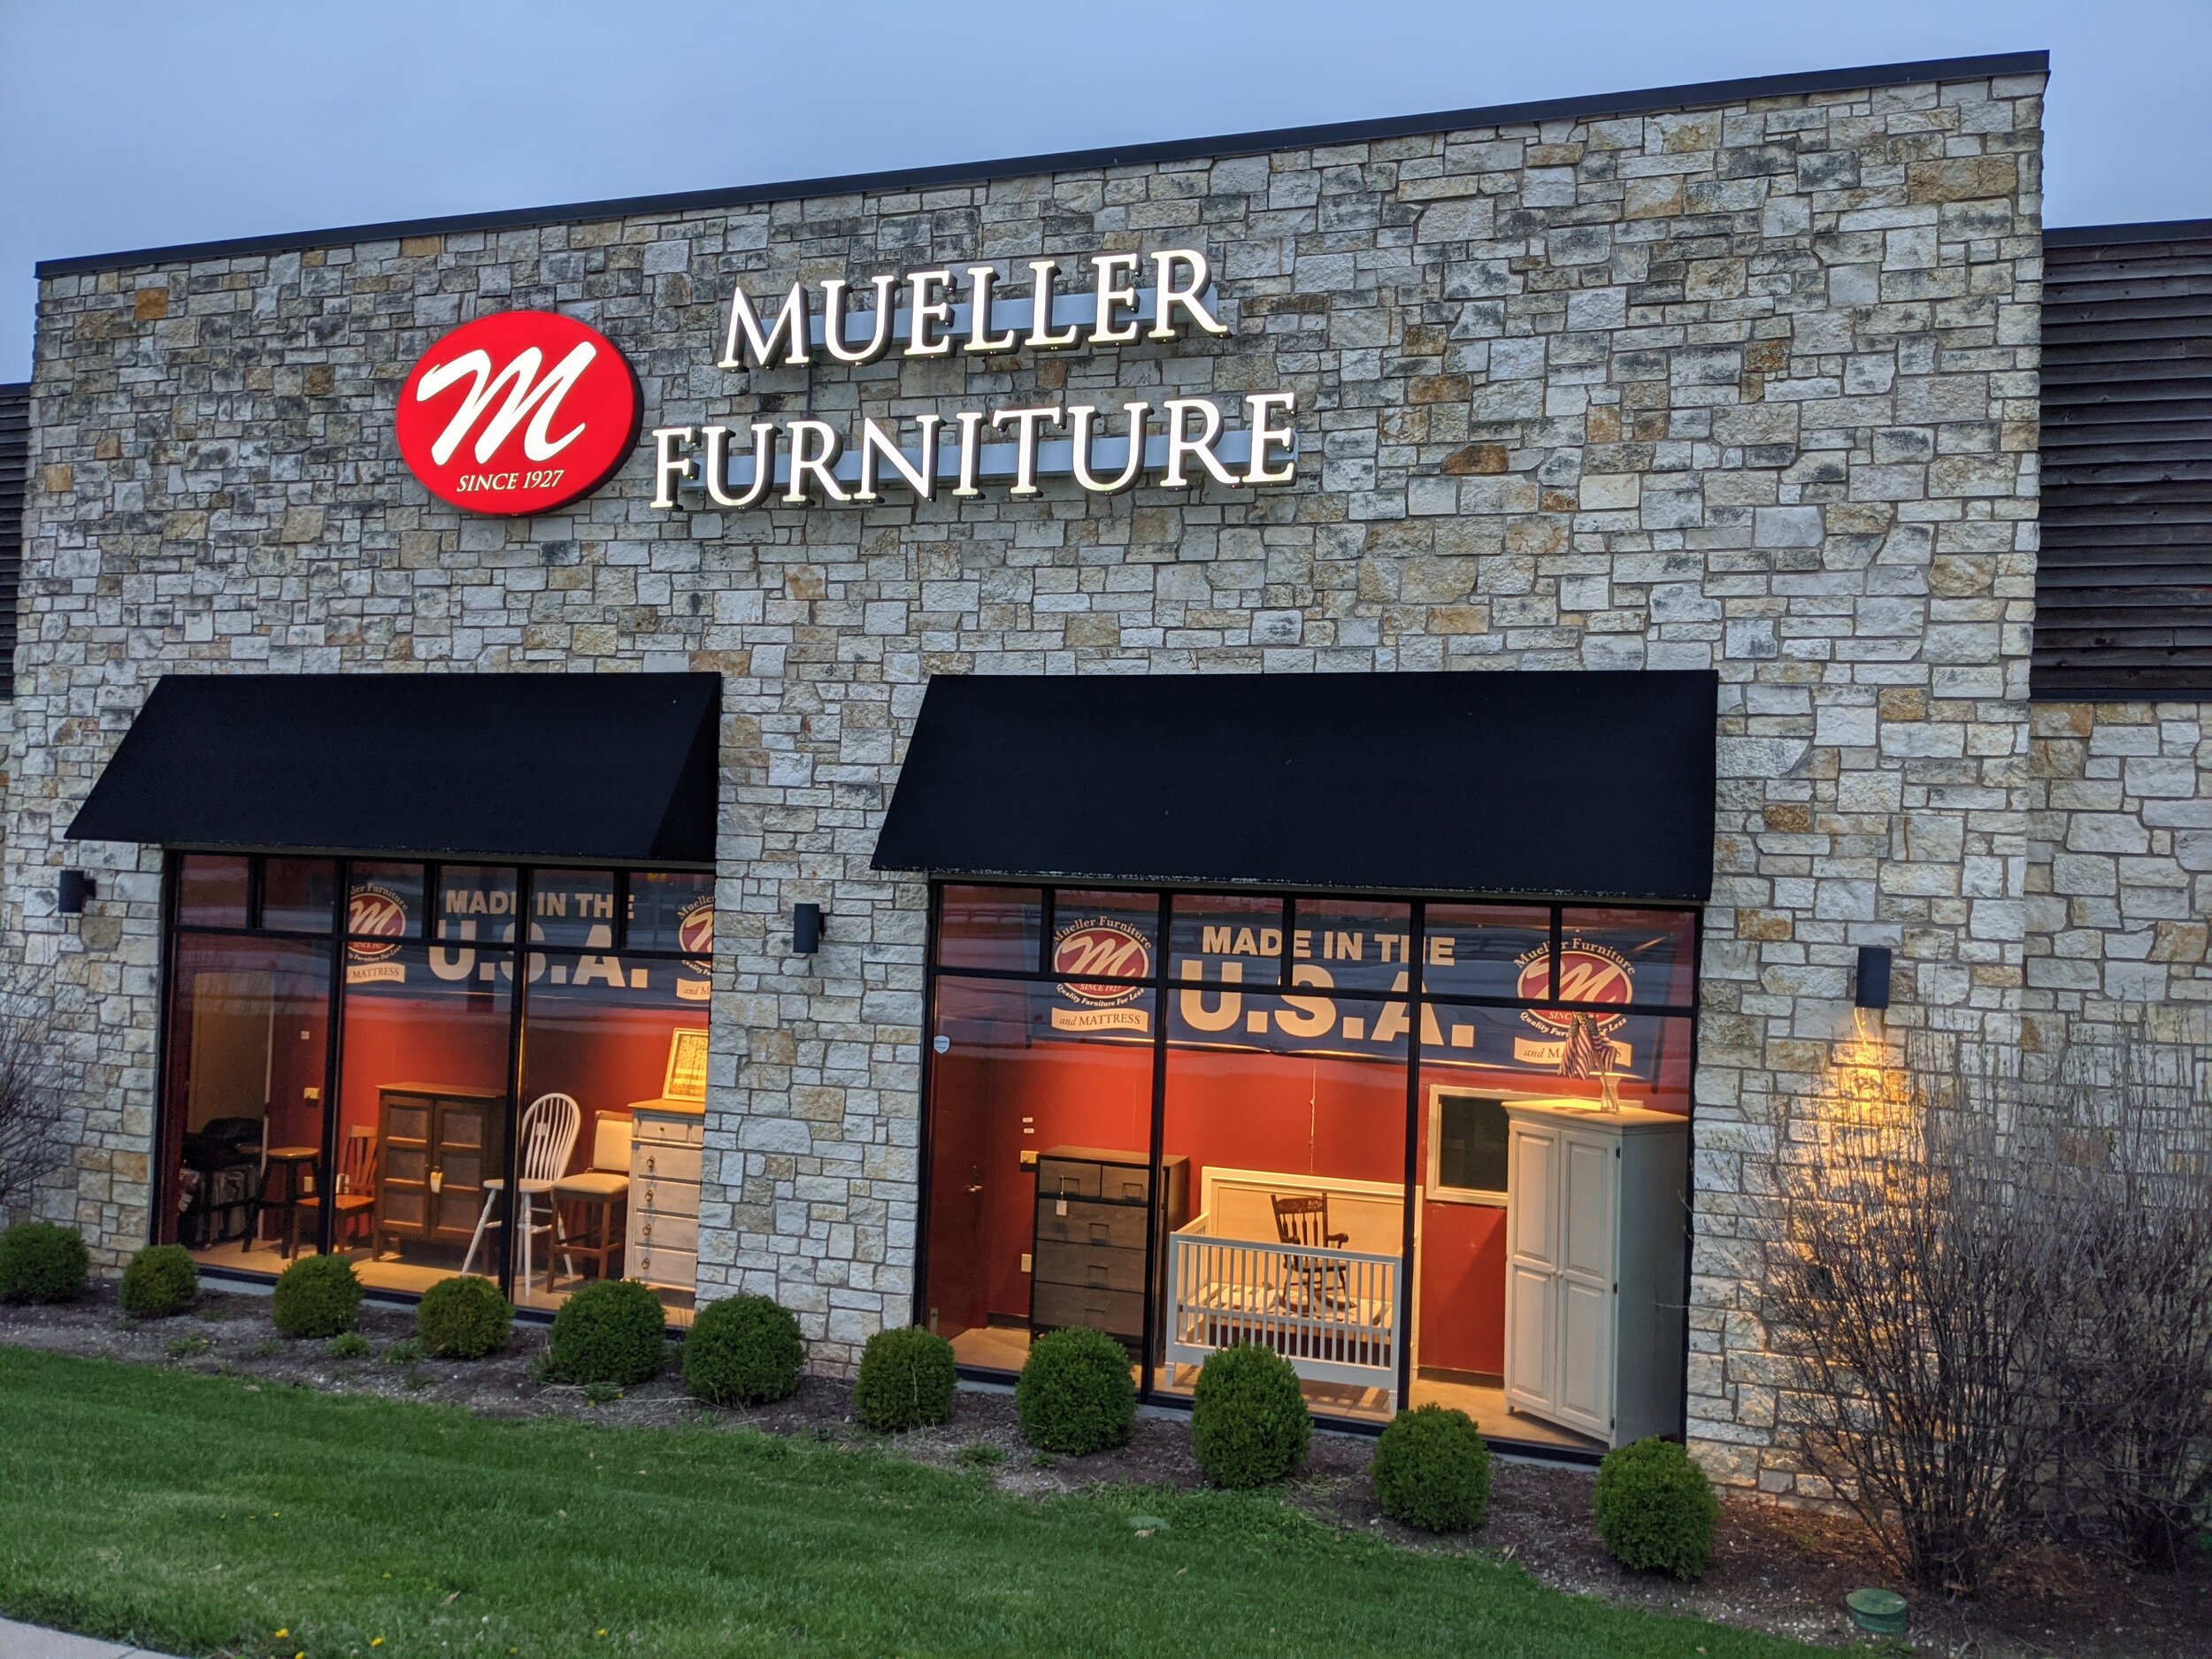 Made in the U.S.A. will be promoted heavily in Ellisville, Mo.,  just as it is at Mueller’s existing stores in Lake St. Louise (shown) and Belleville, Ill.